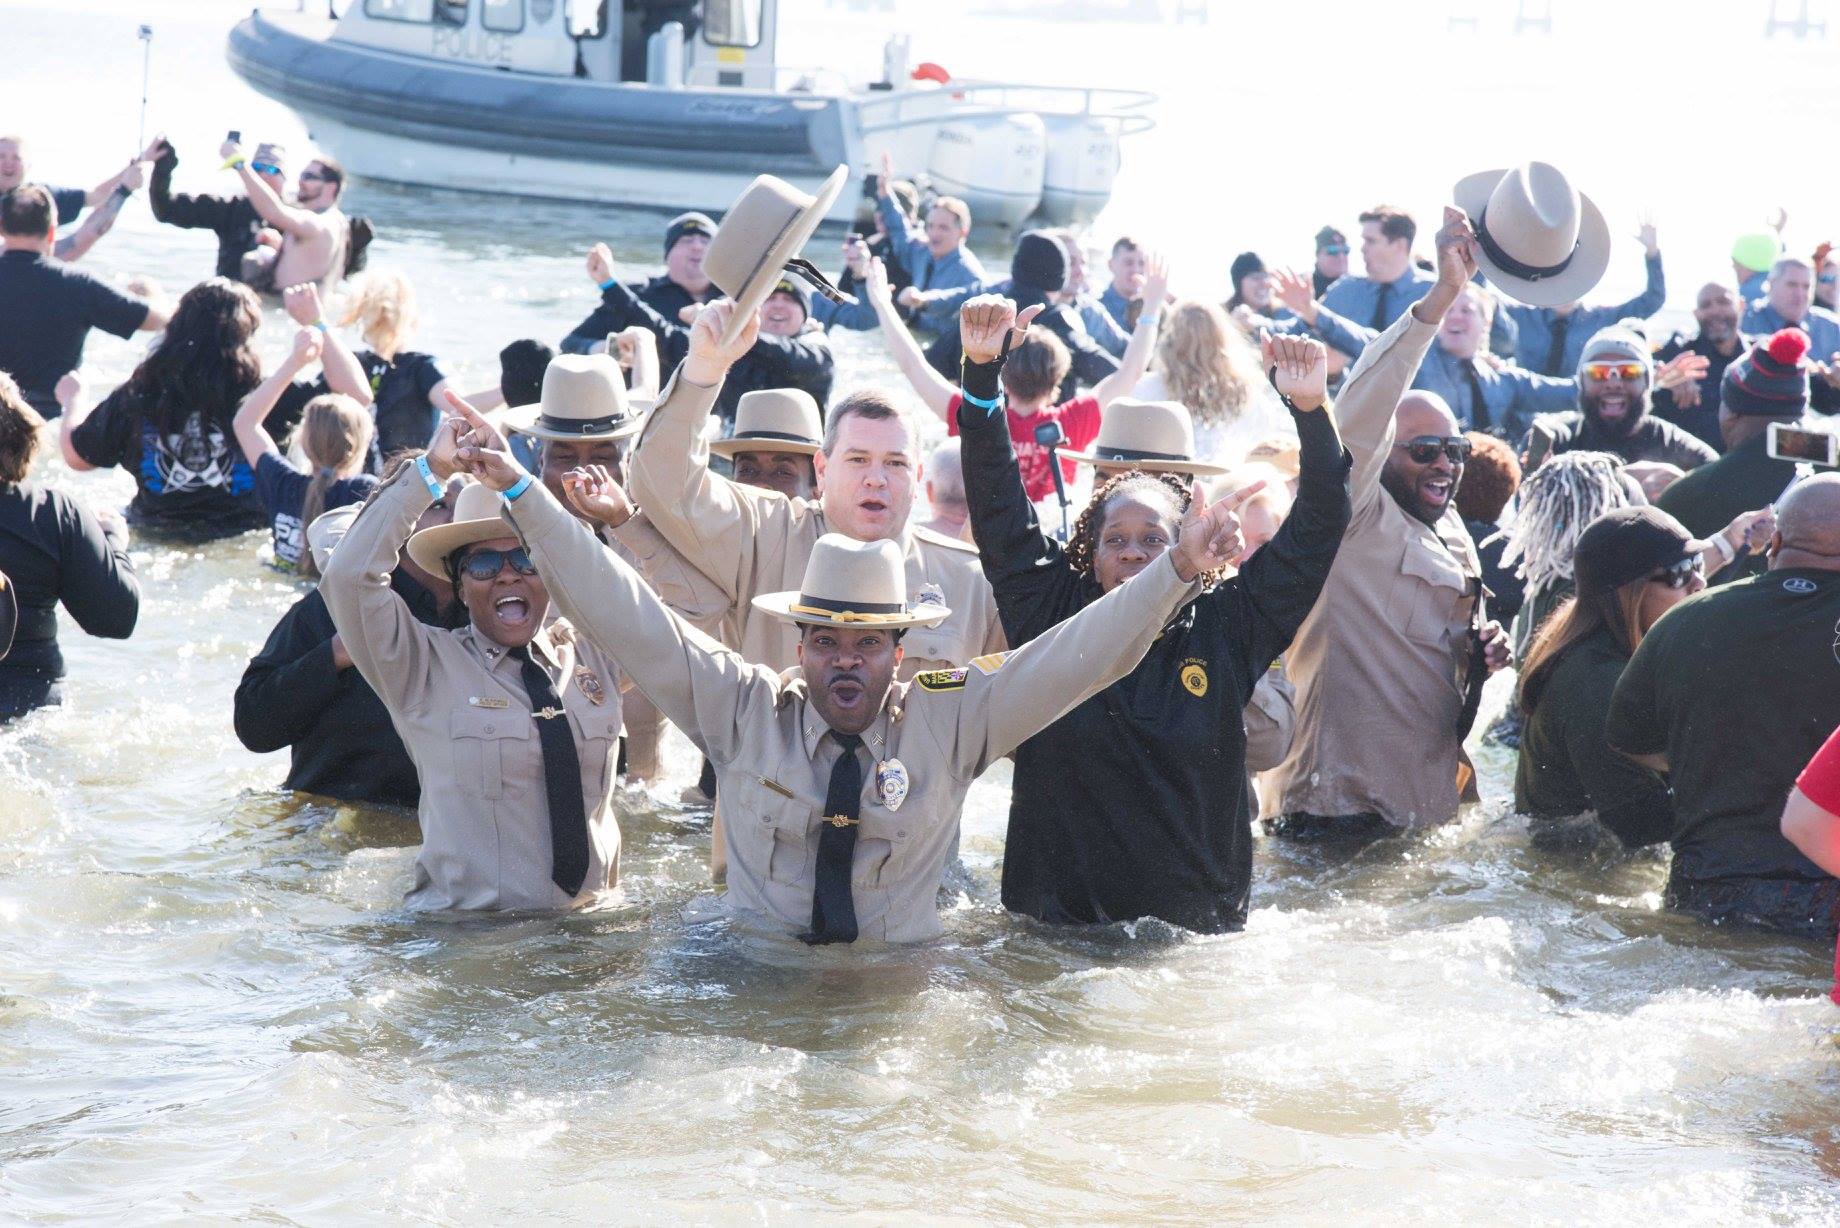 UMB police officers dive headfirst into the frigid waters of the Chesapeake Bay to raise money for the Maryland Special Olympics at the 2018 Polar Bear Plunge.